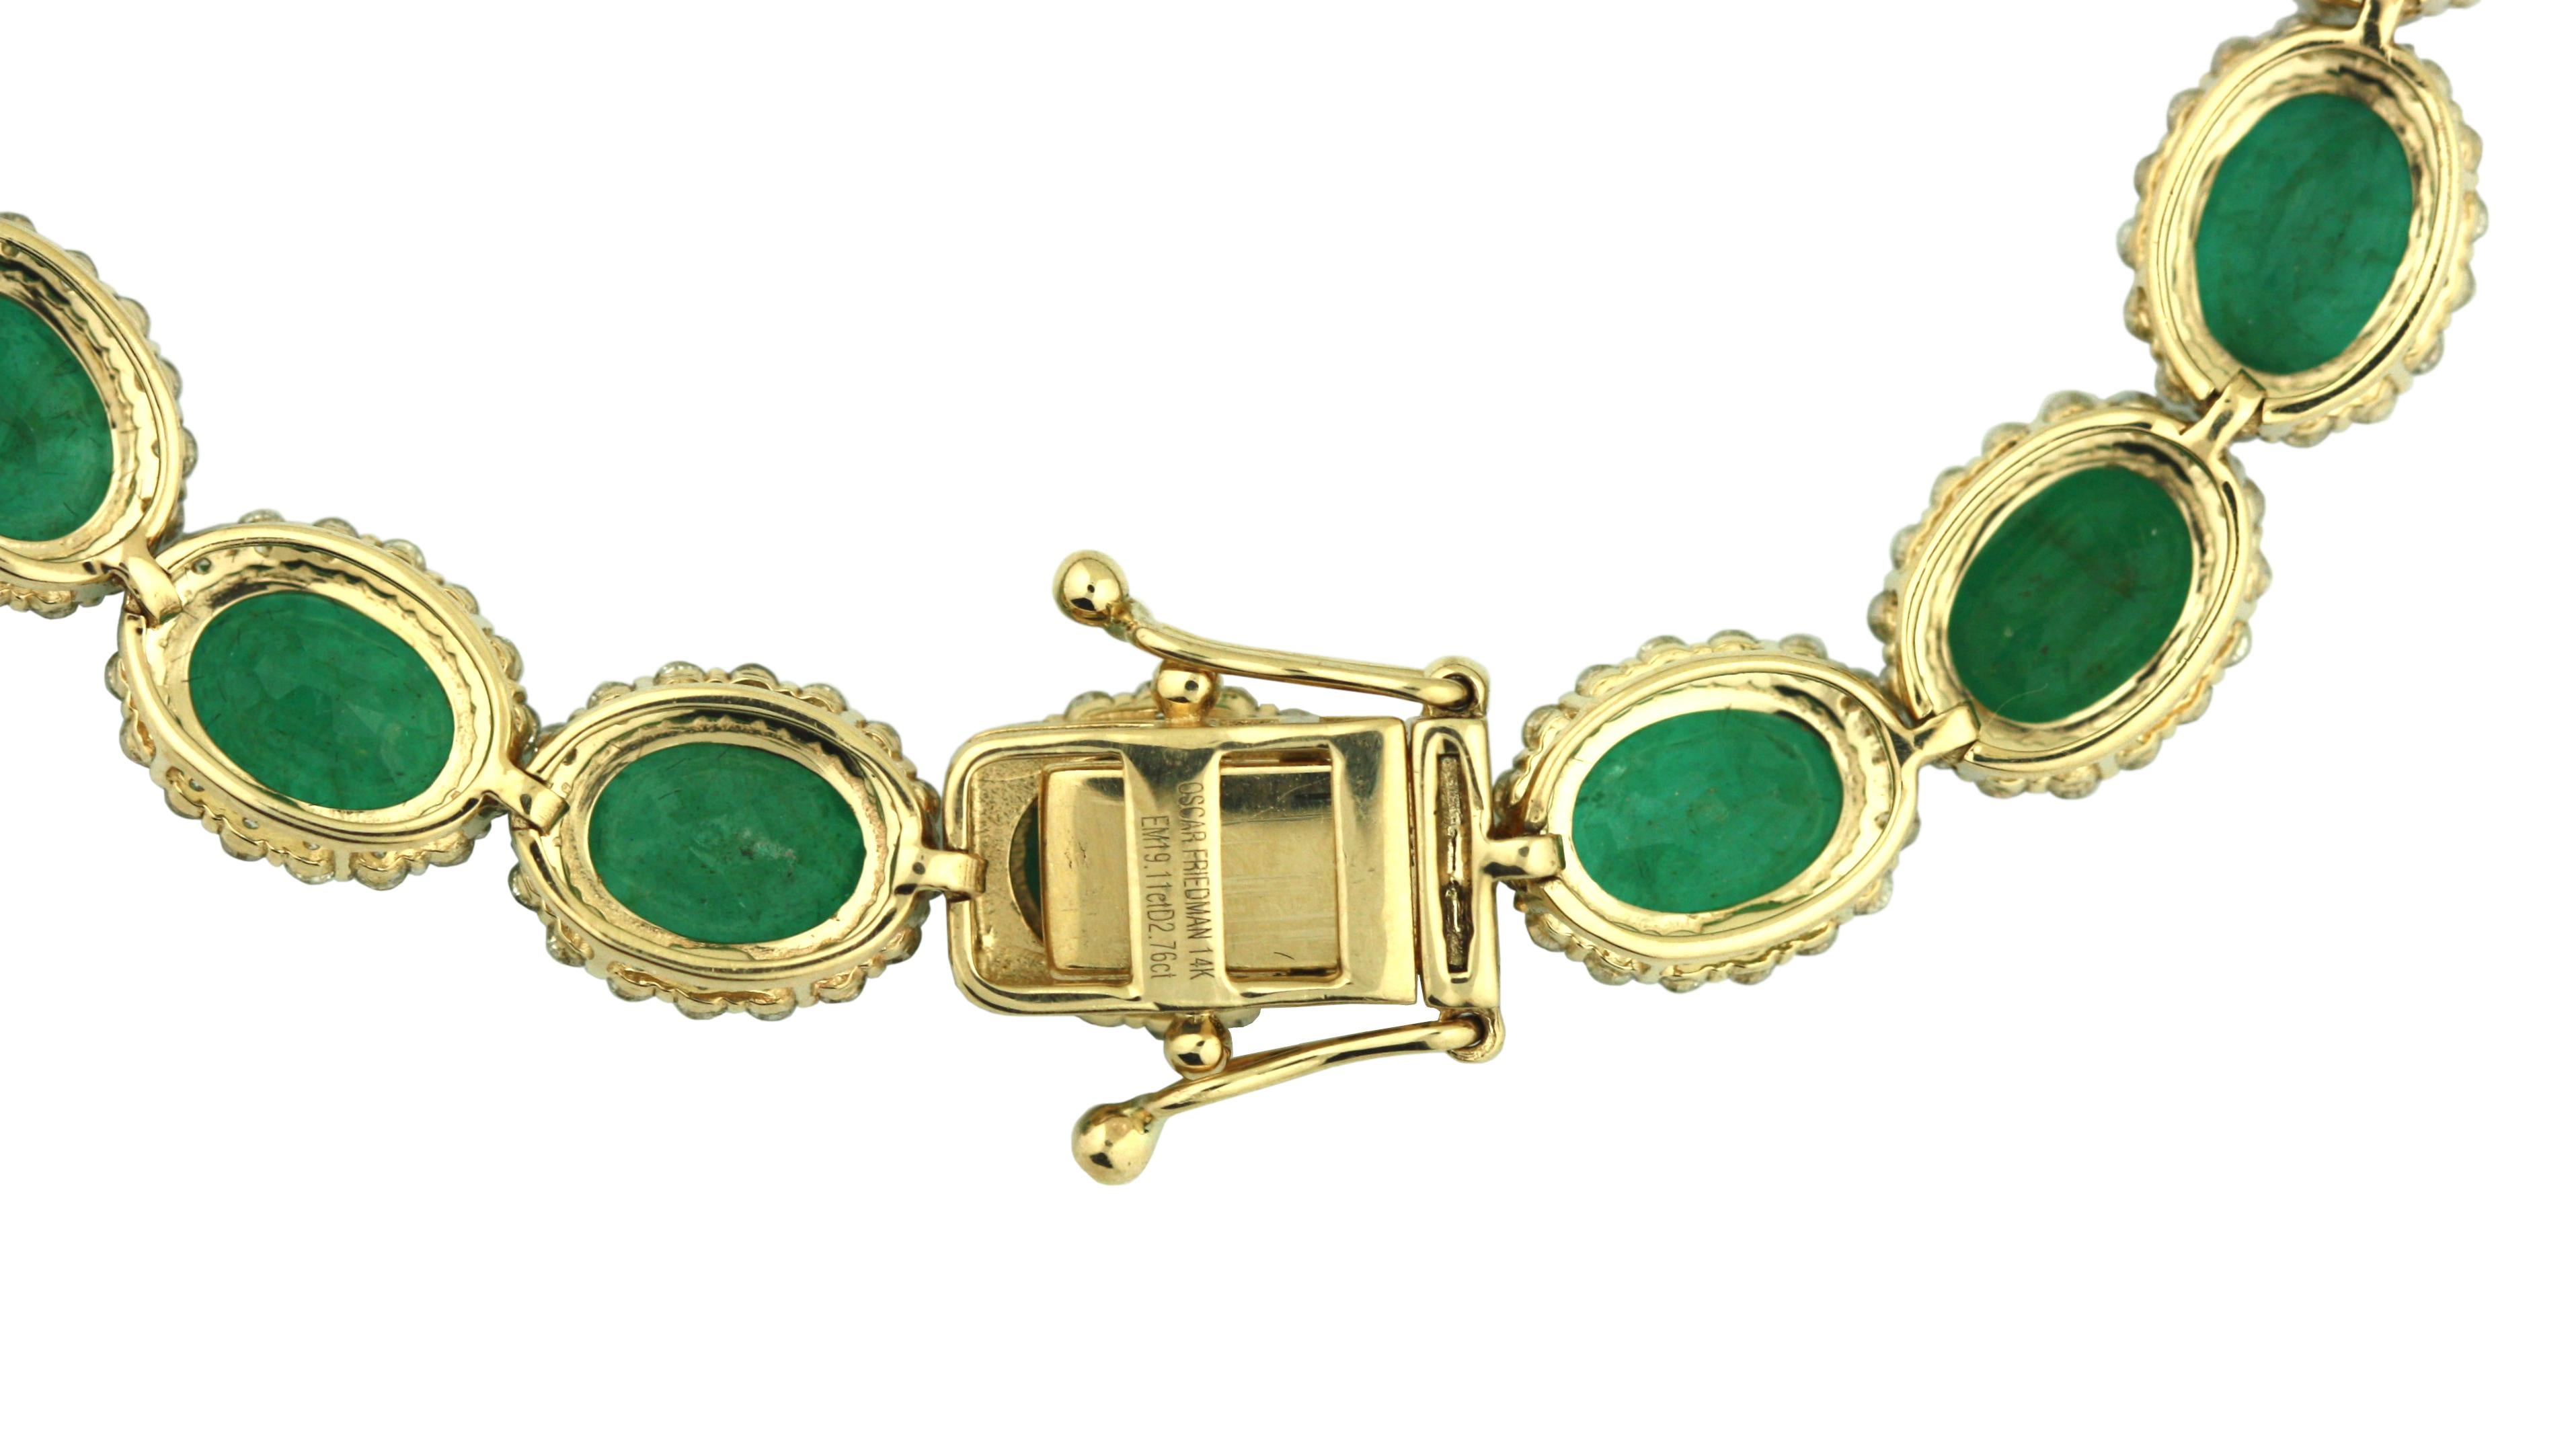 
Yellow Gold Emerald and Diamond bracelet
Featuring 17 oval-shaped natural emeralds
Weighing approximately 19.11 carats
Each emerald within a surround of round, brilliant cut diamonds
Weighing approximately 2.76 carats
Set in 14 karat yellow